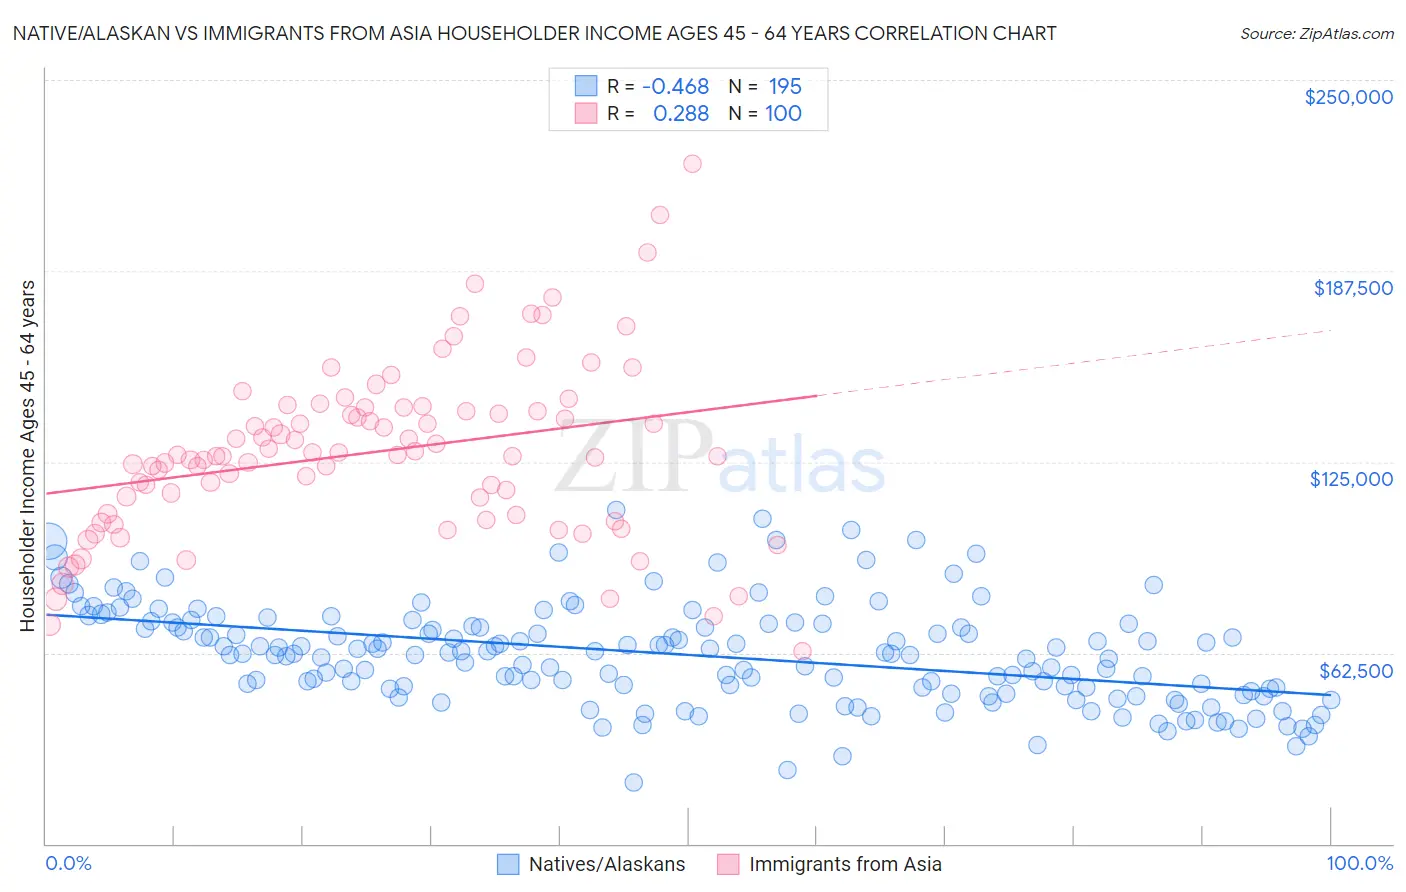 Native/Alaskan vs Immigrants from Asia Householder Income Ages 45 - 64 years